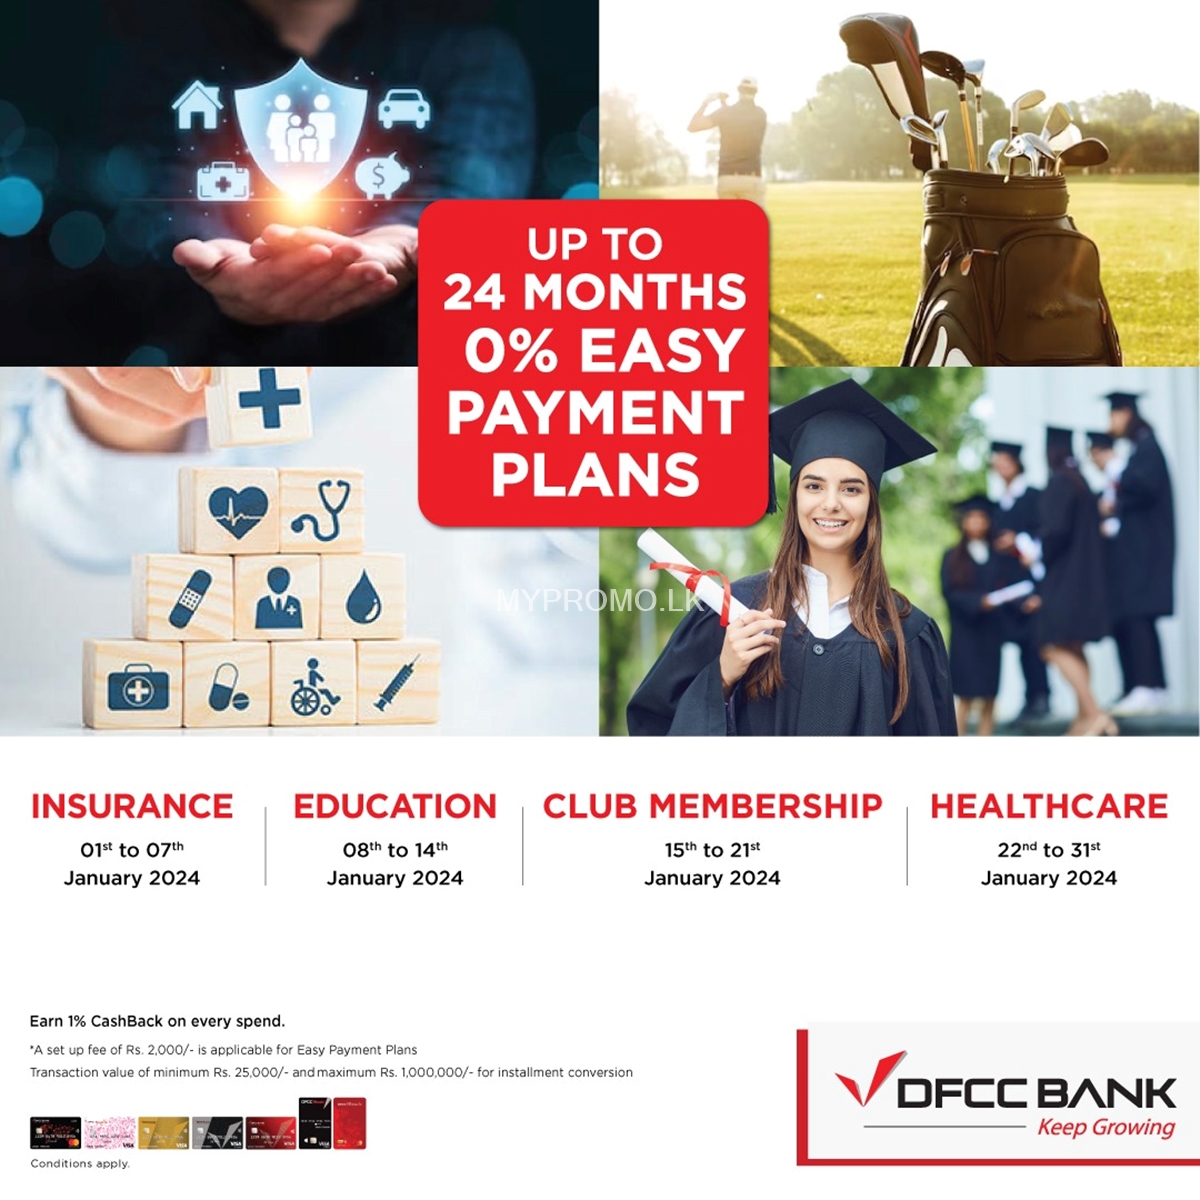 Buy Now Pay Later with DFCC Credit Cards